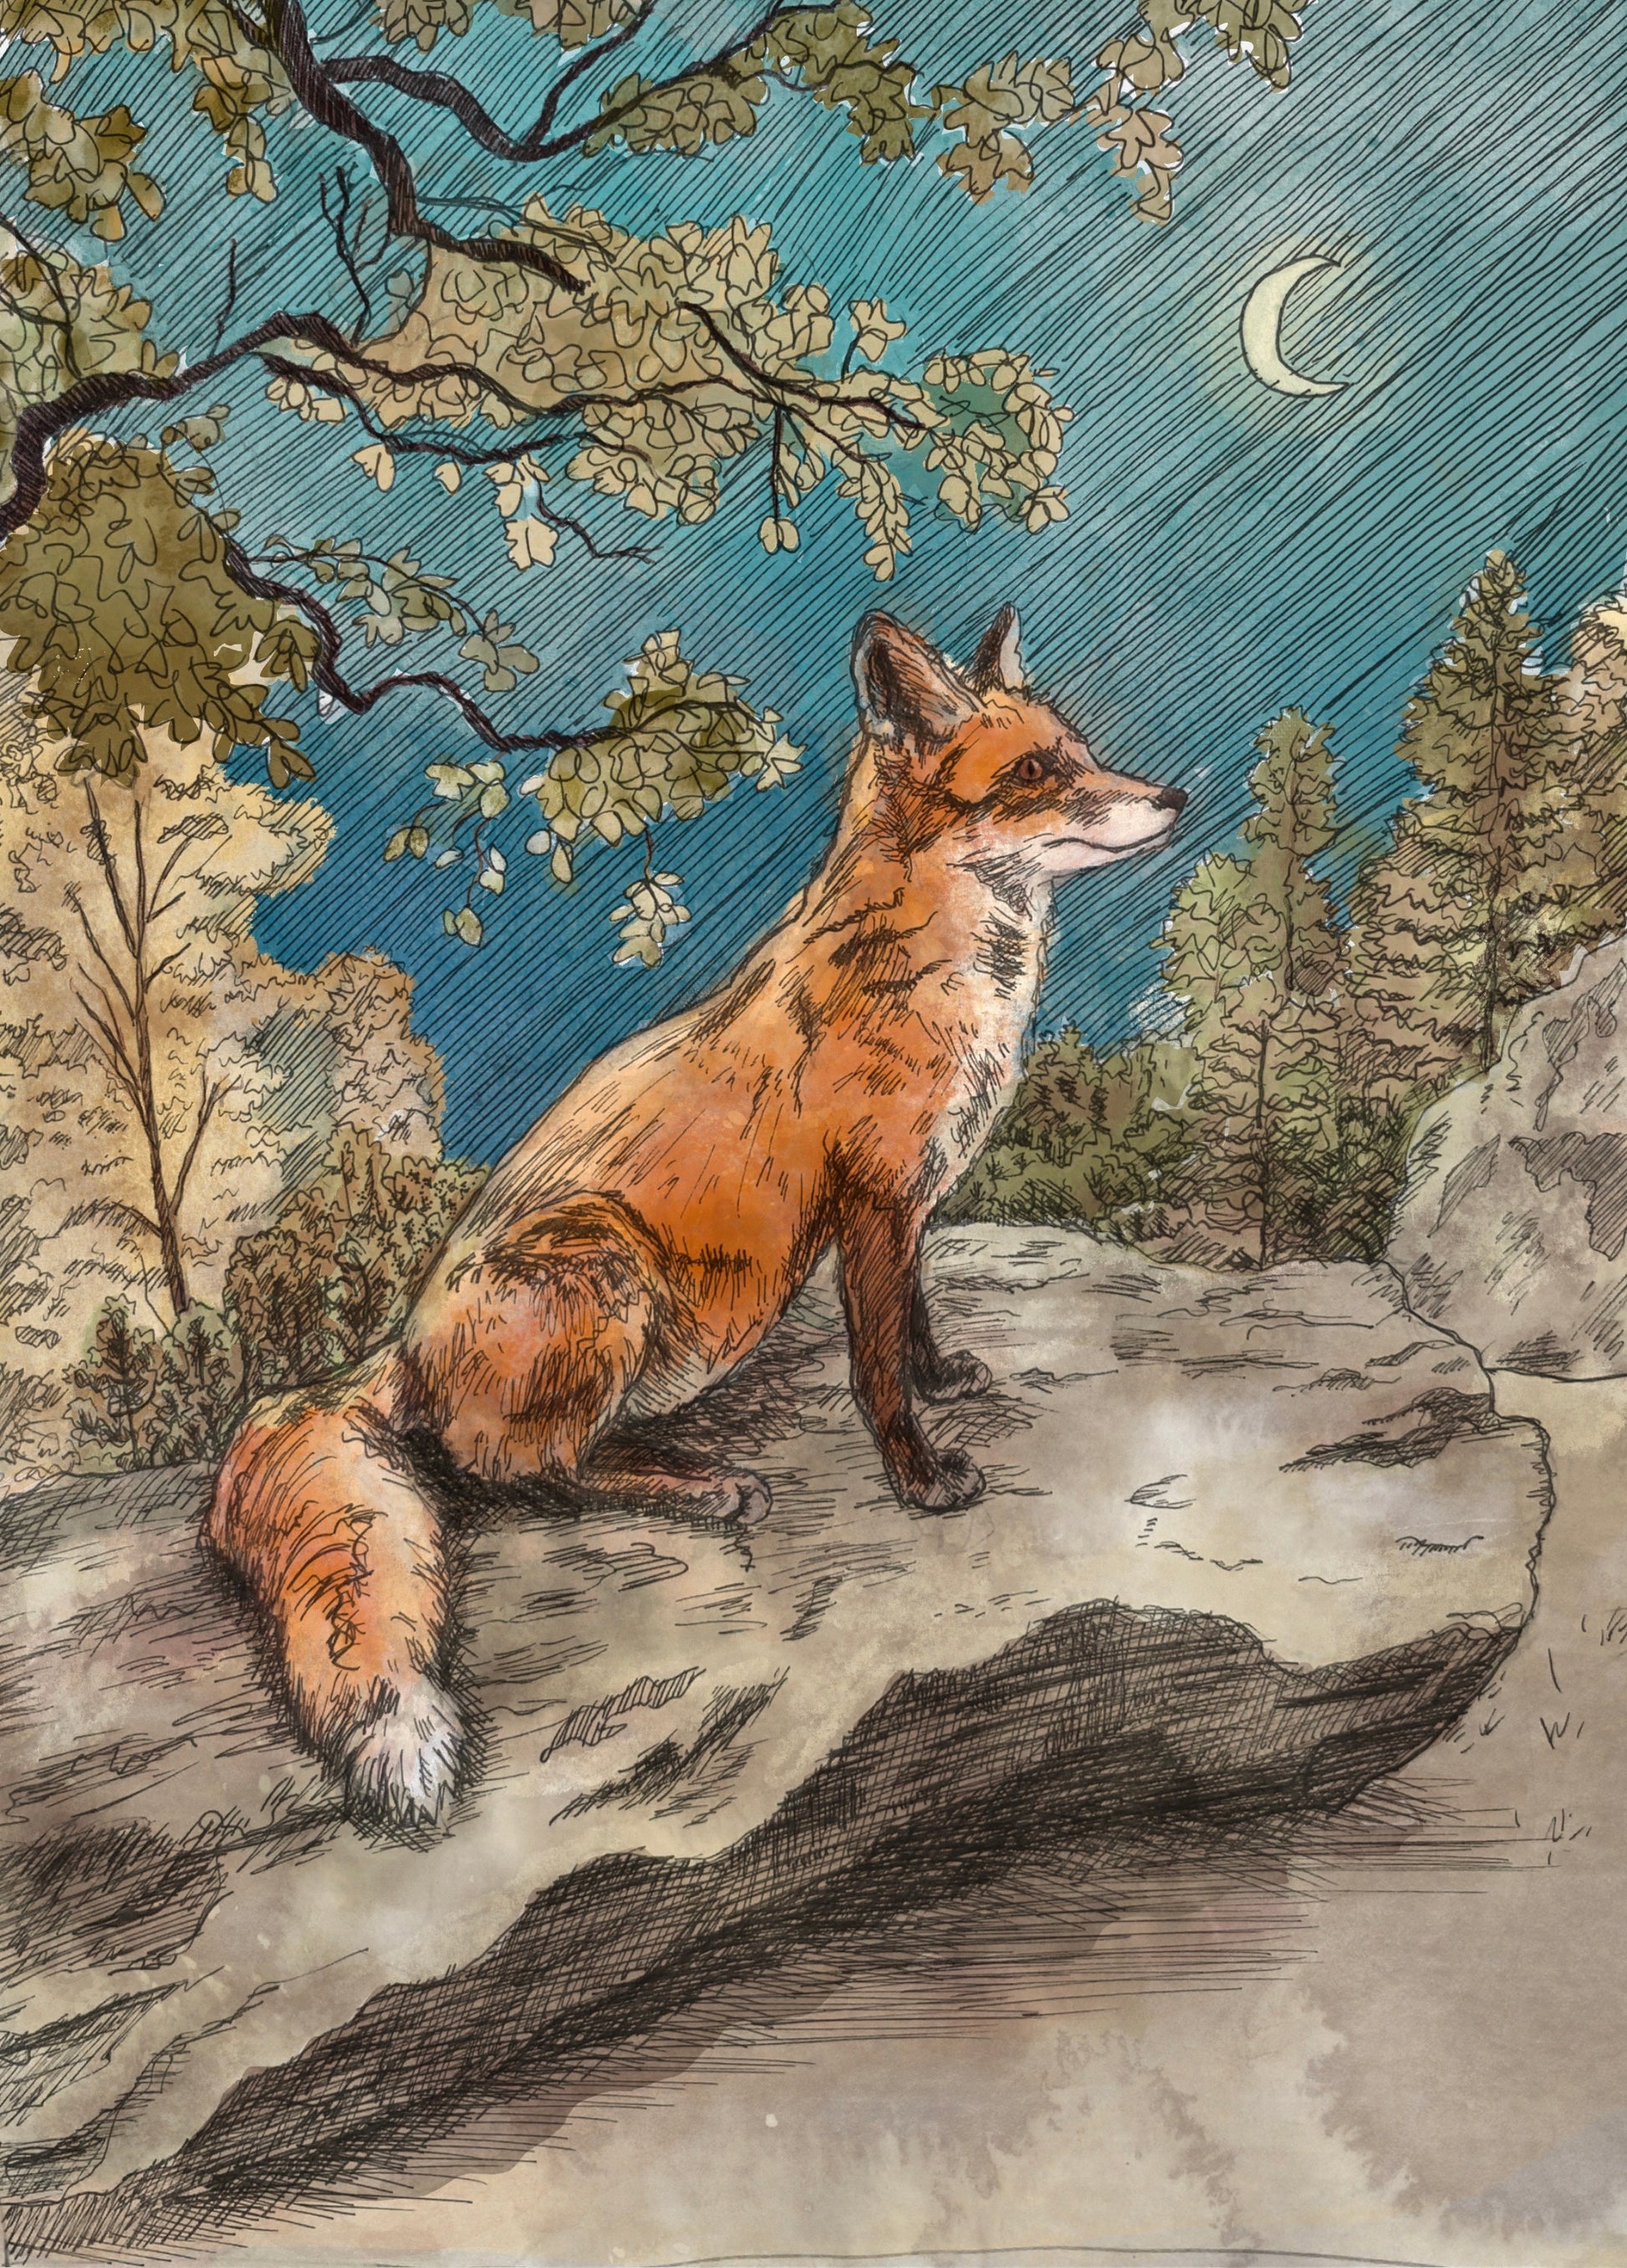 ink and watercolour illustration of a fox in the forest at night time sitting under the moon light